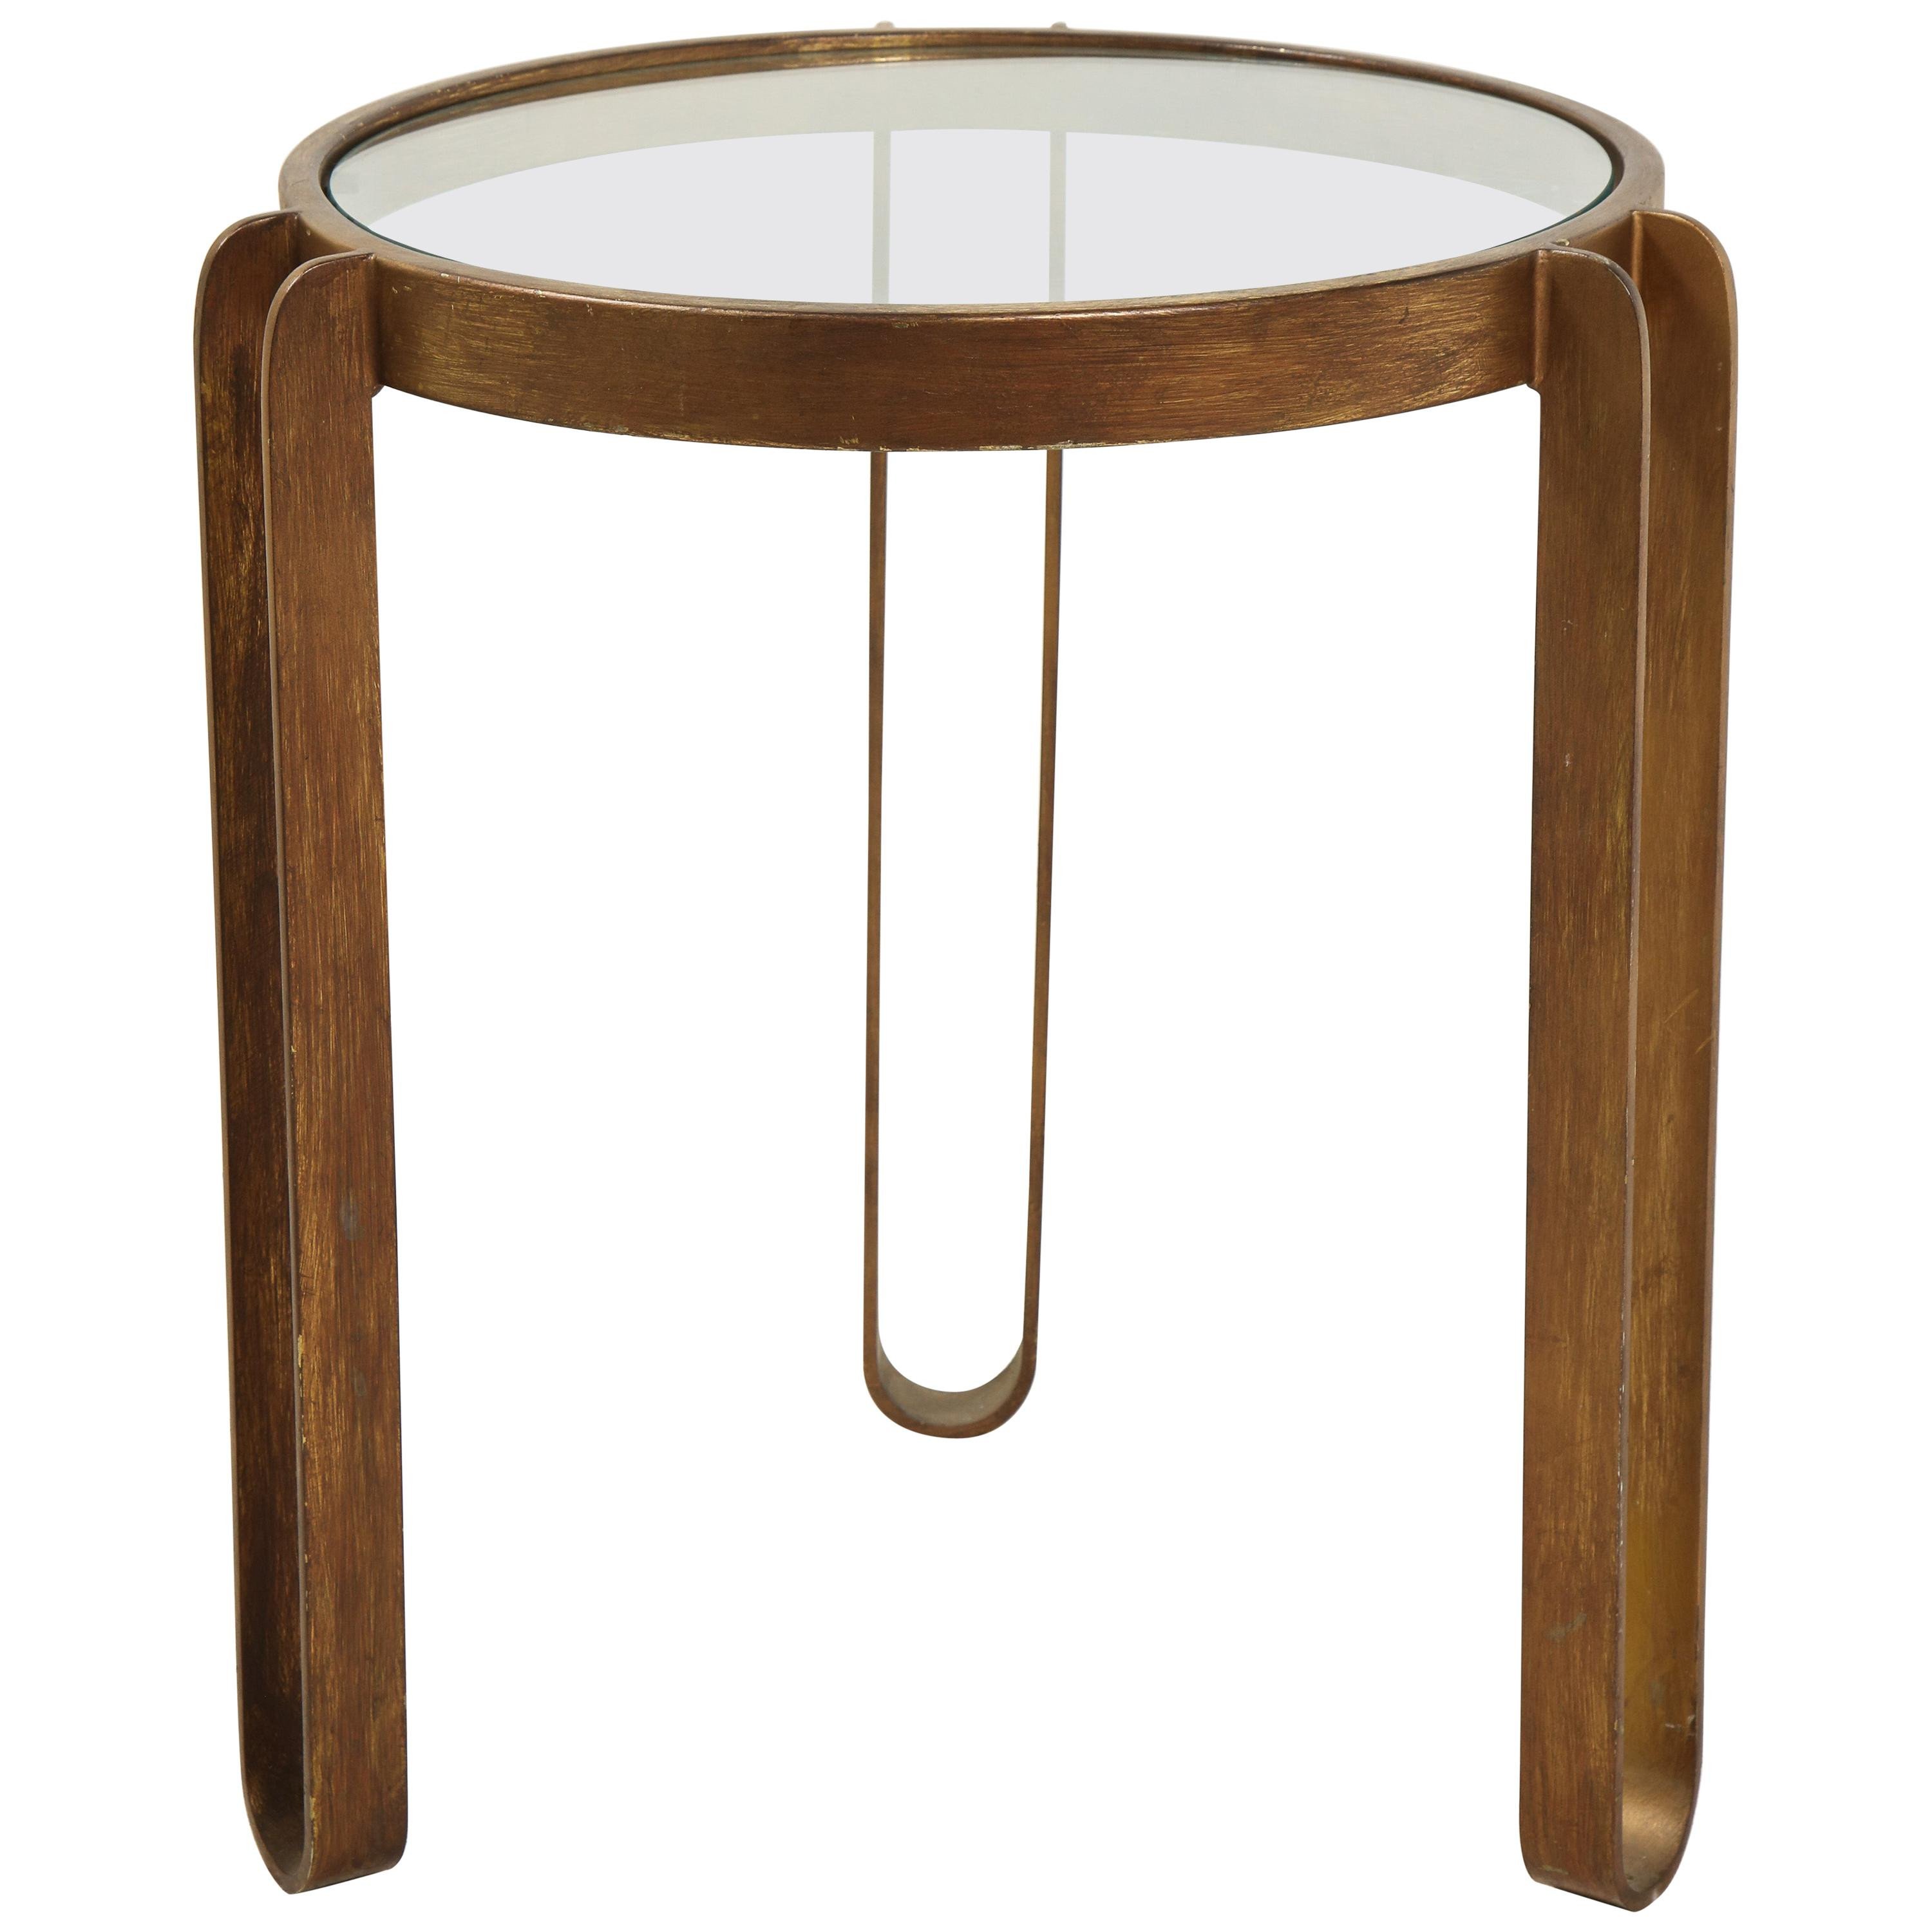 Glass Side Tables for Bedroom Elegant Midcentury Round Brass and Glass Side Table with Hairpin